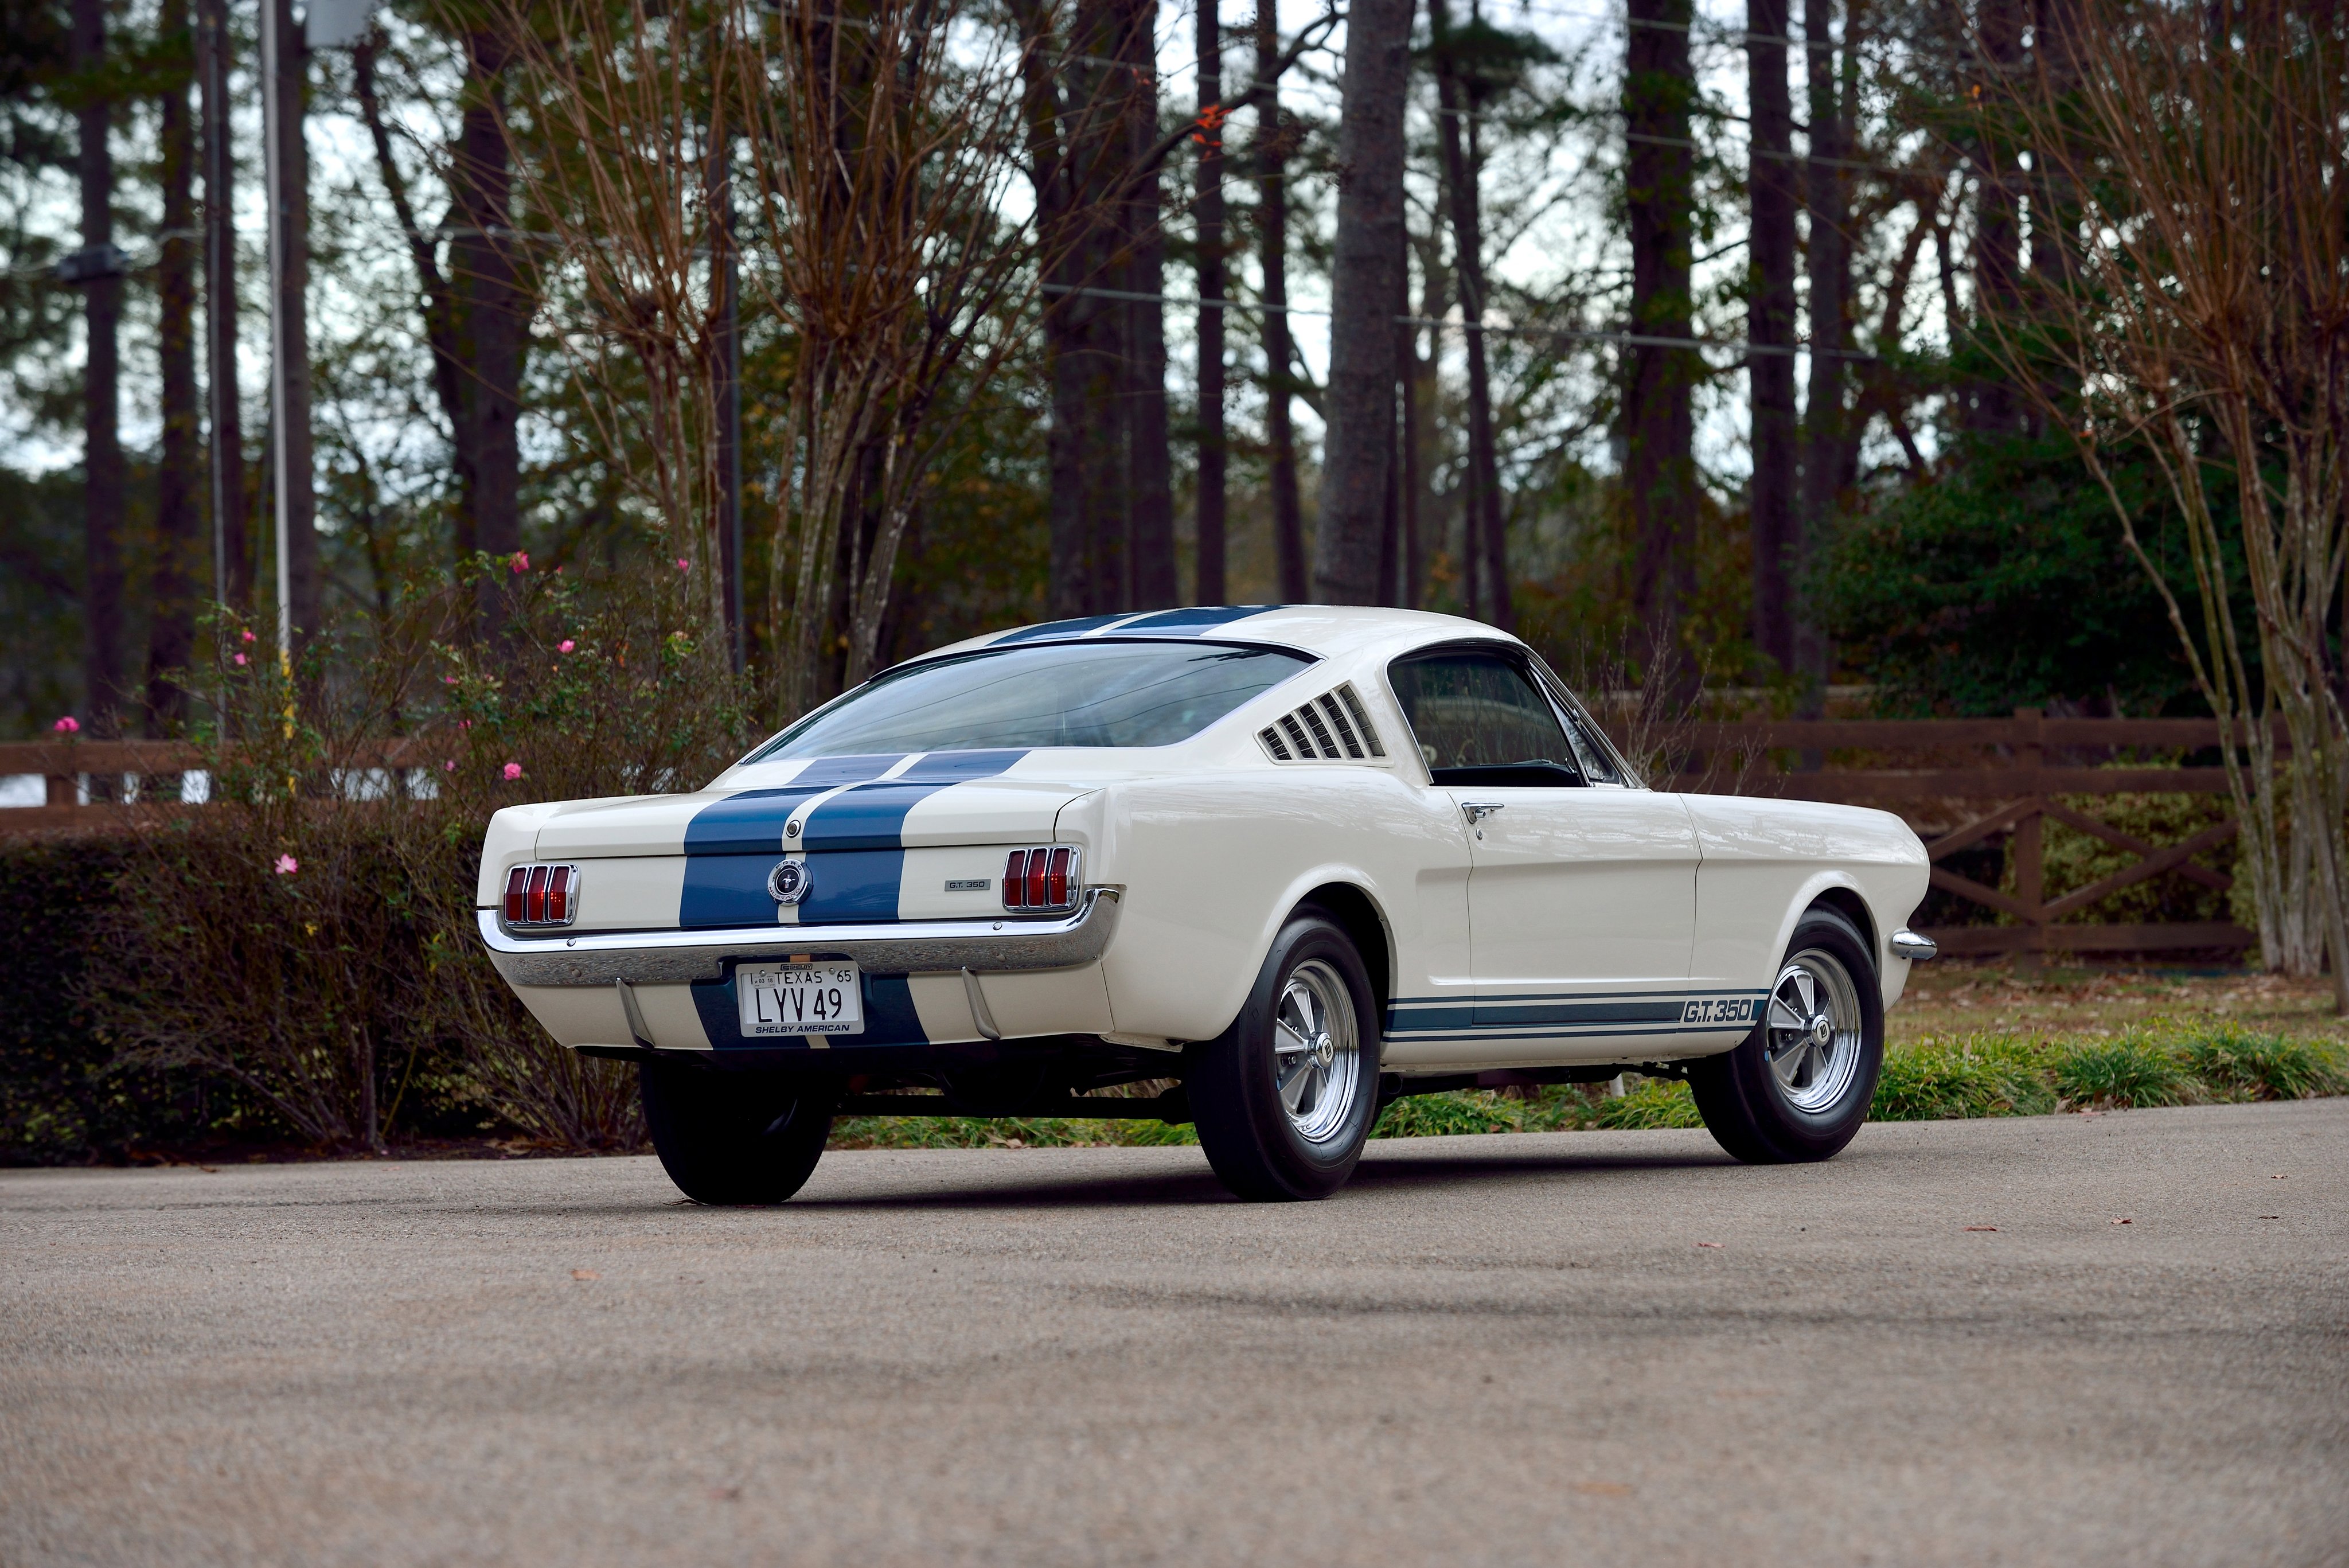 1965, Shelby, Gt350, Lemans, Ford, Mustang, Muscle, Classic Wallpaper